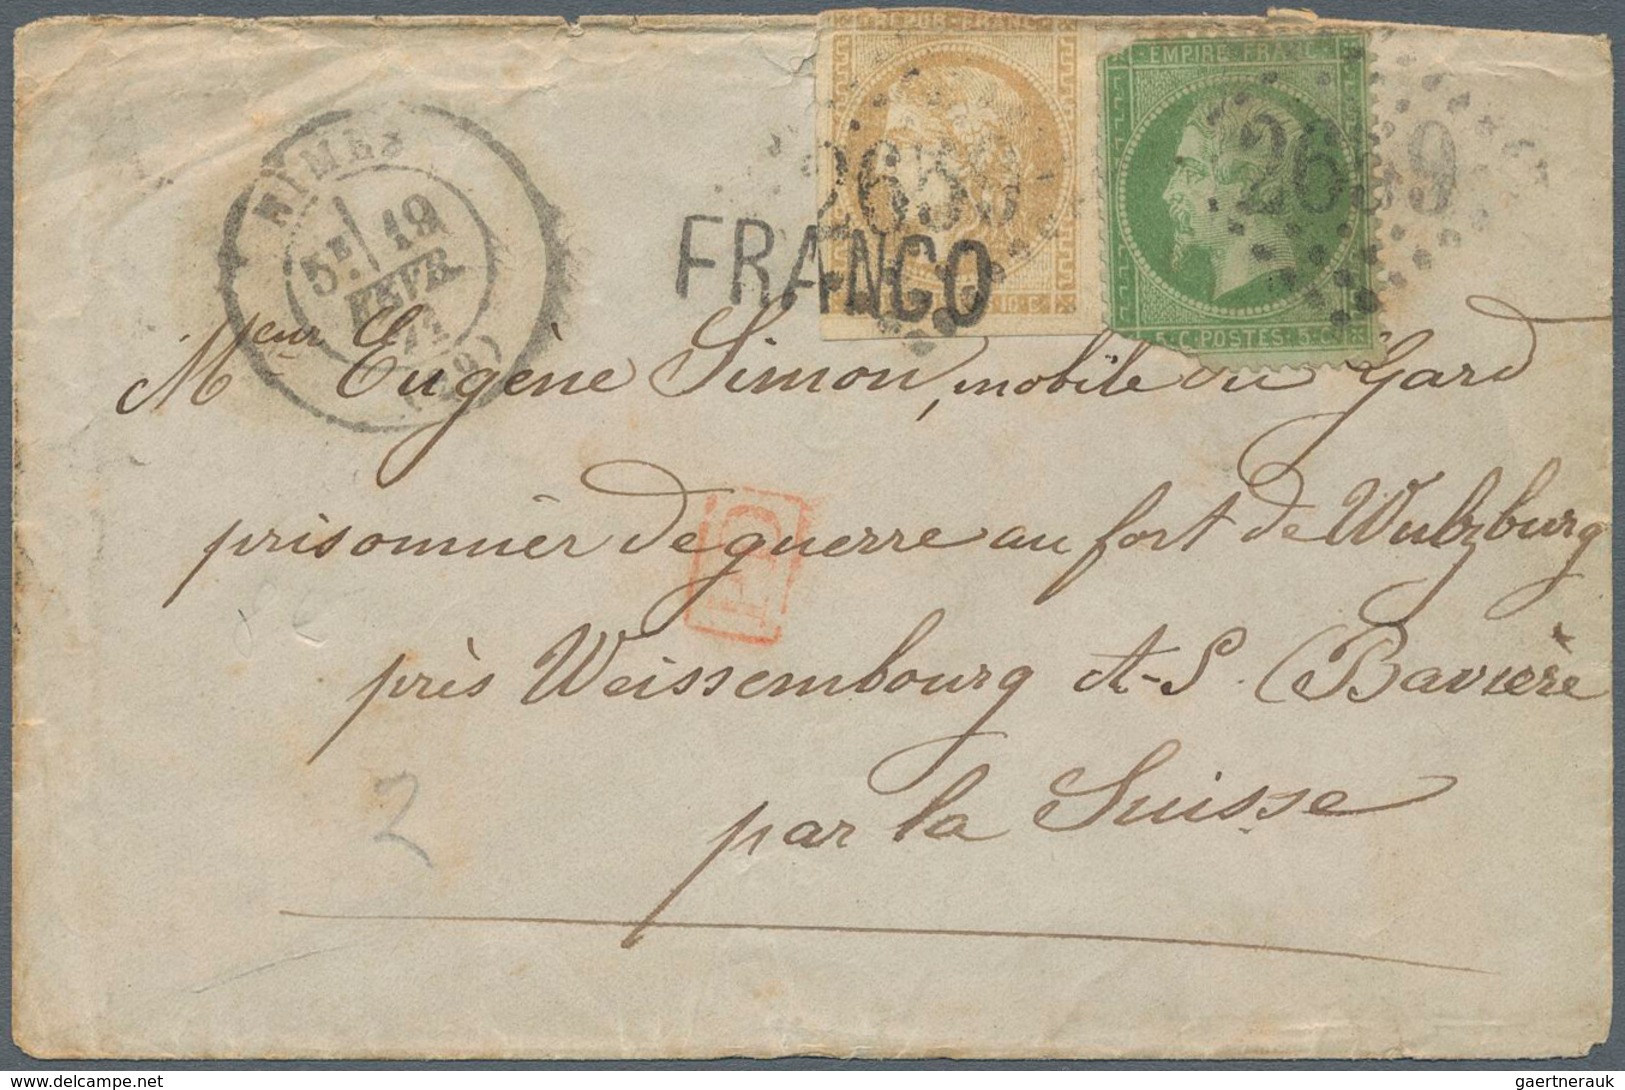 13599 Frankreich: 1862/70, Napoleon 5 C Green On Bluish Paper Perforated And 1870 Ceres 10 C Yellow-brown - Gebraucht